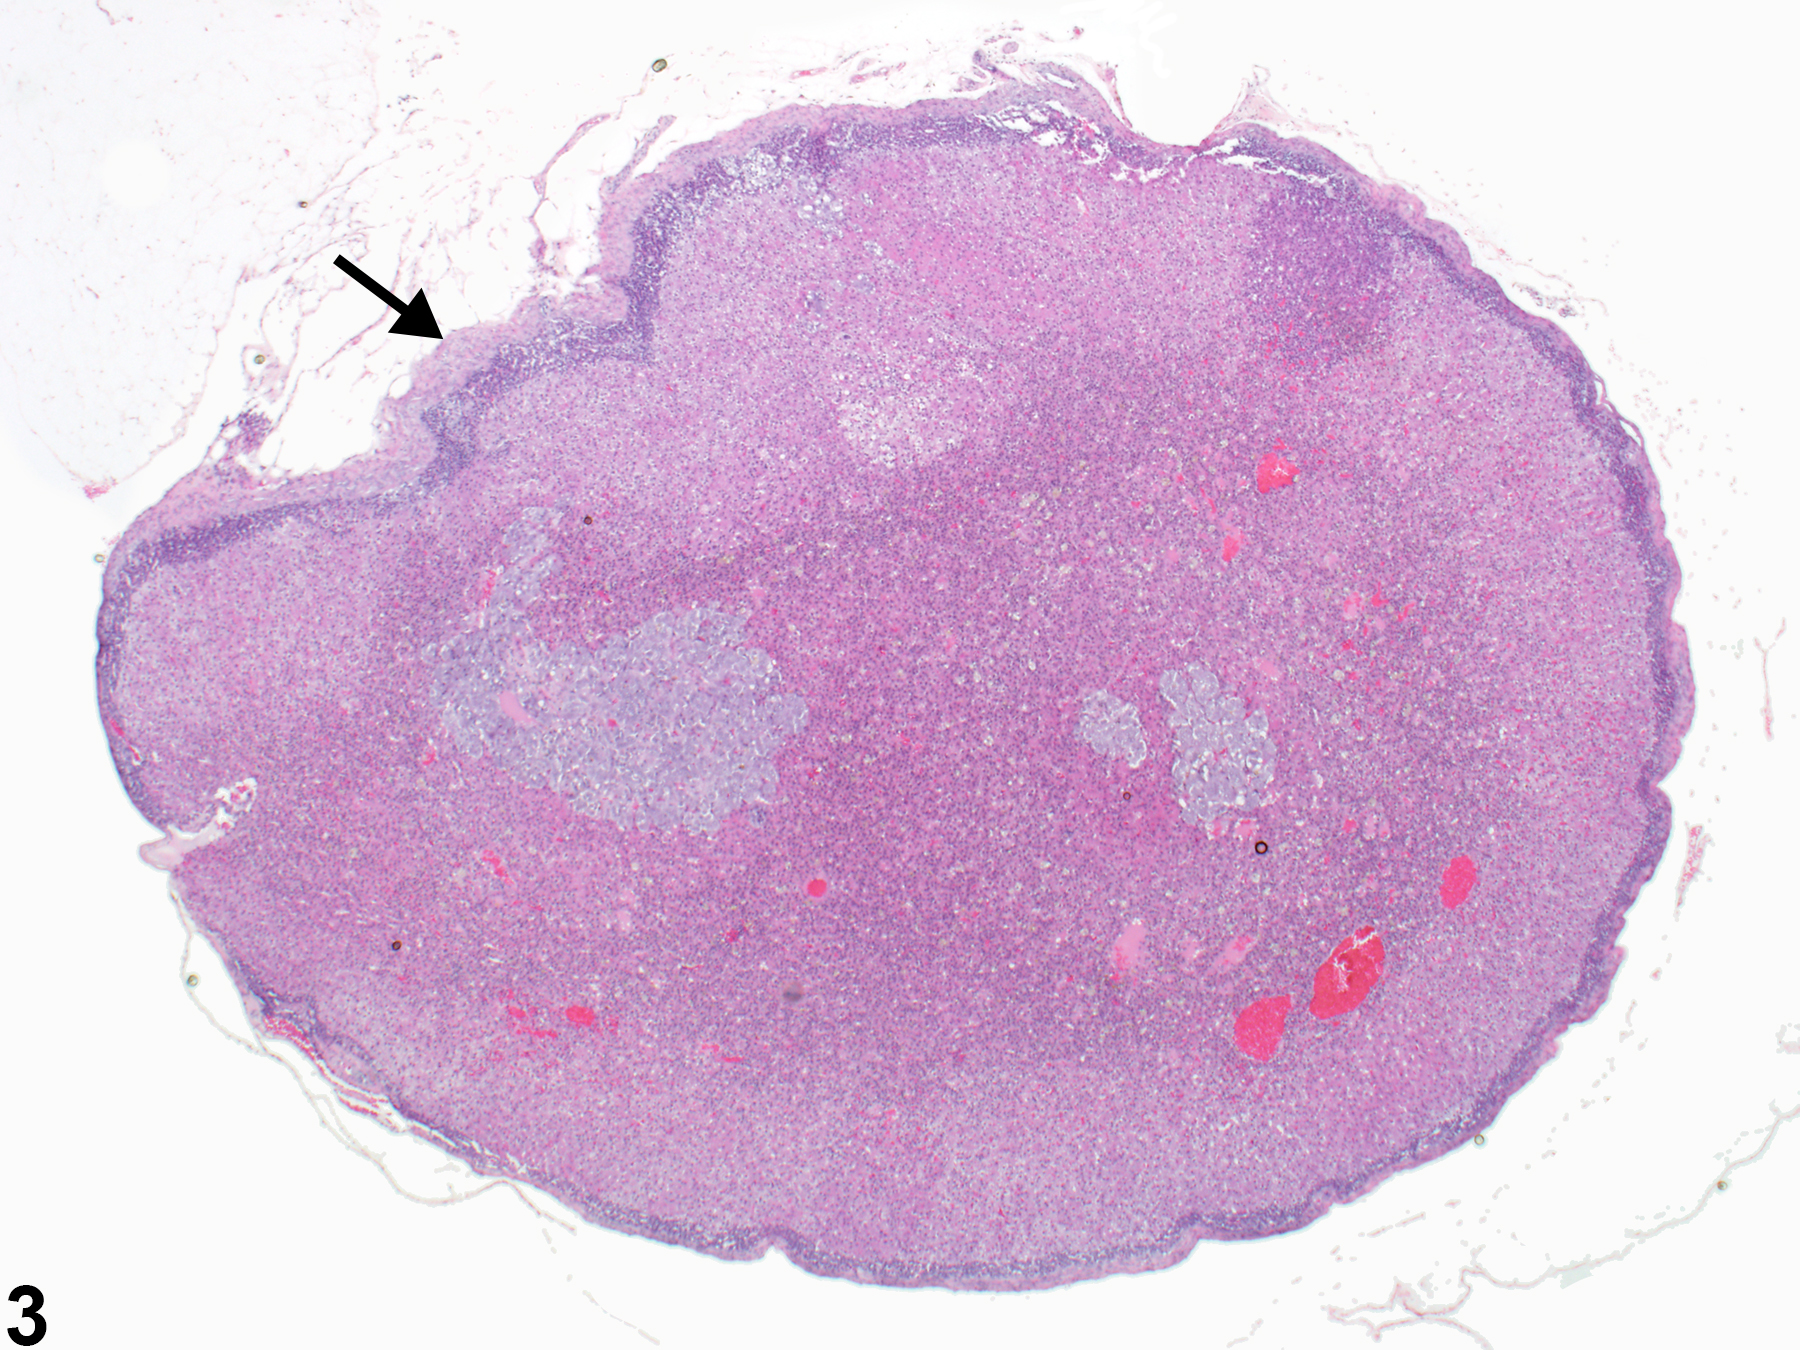 Image of fibrosis in the adrenal gland capsule from a female F344/N rat in a chronic study